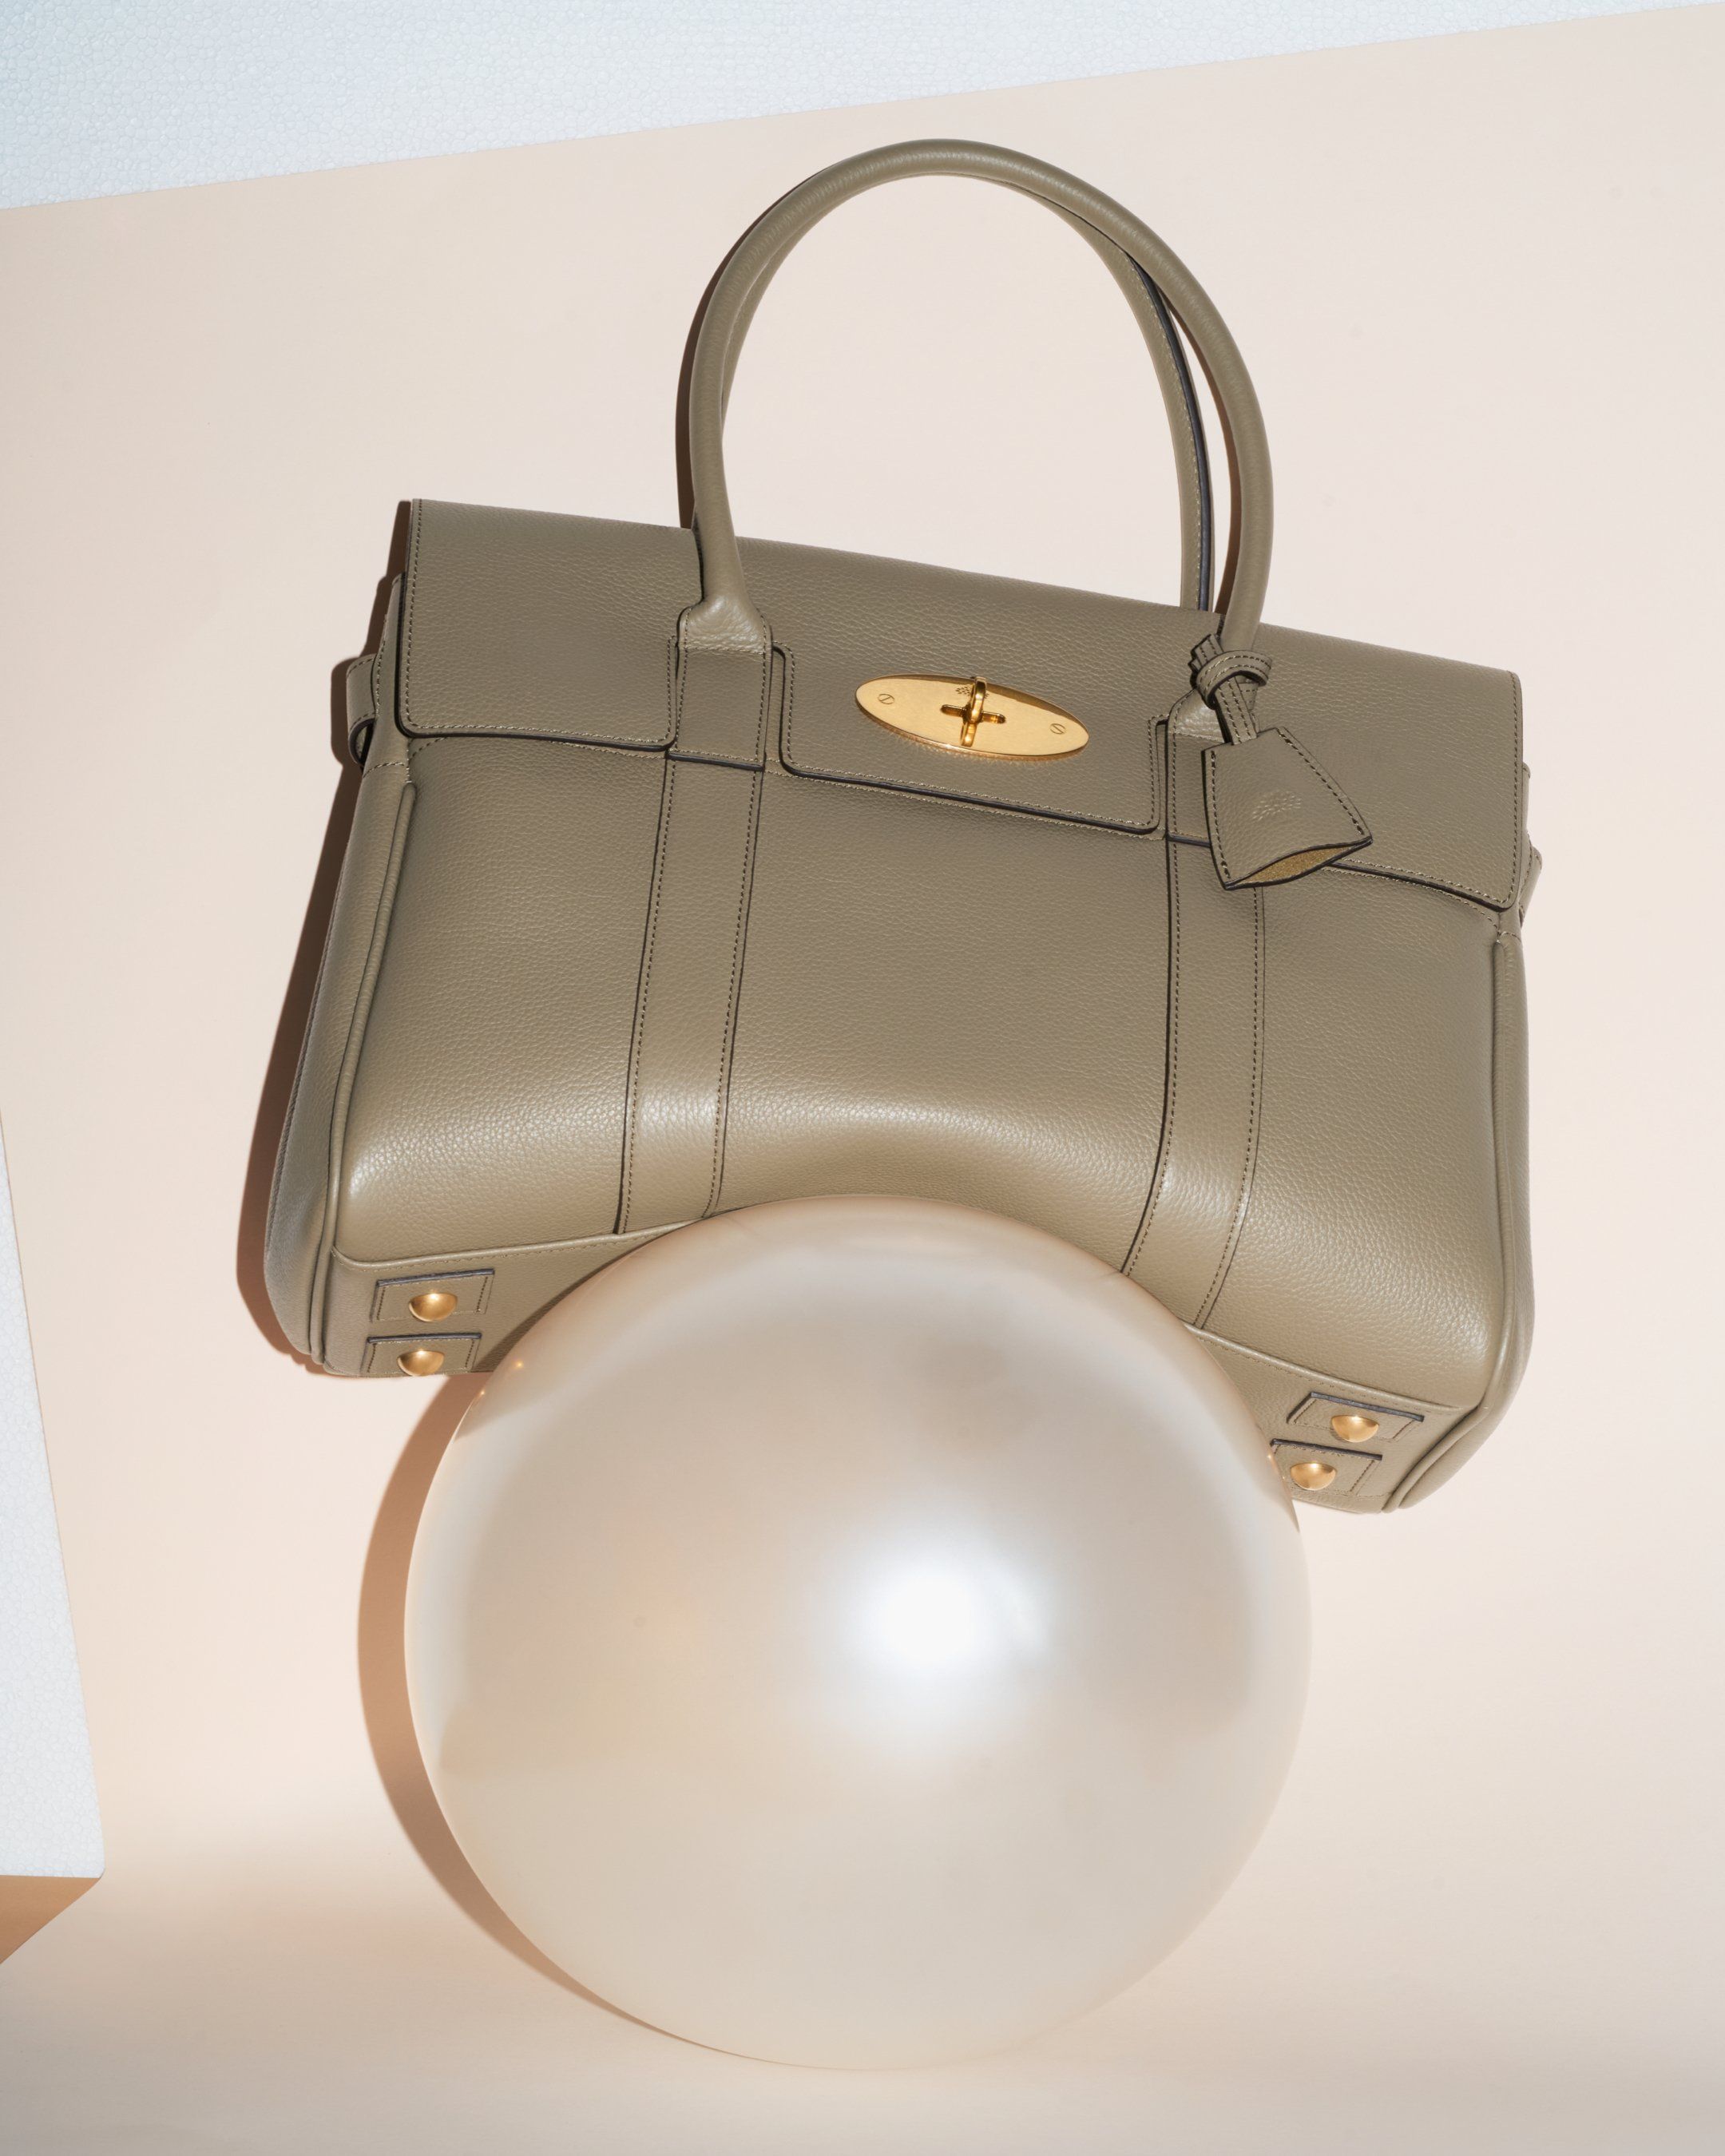 Mulberry Bayswater handbag in linen green leather